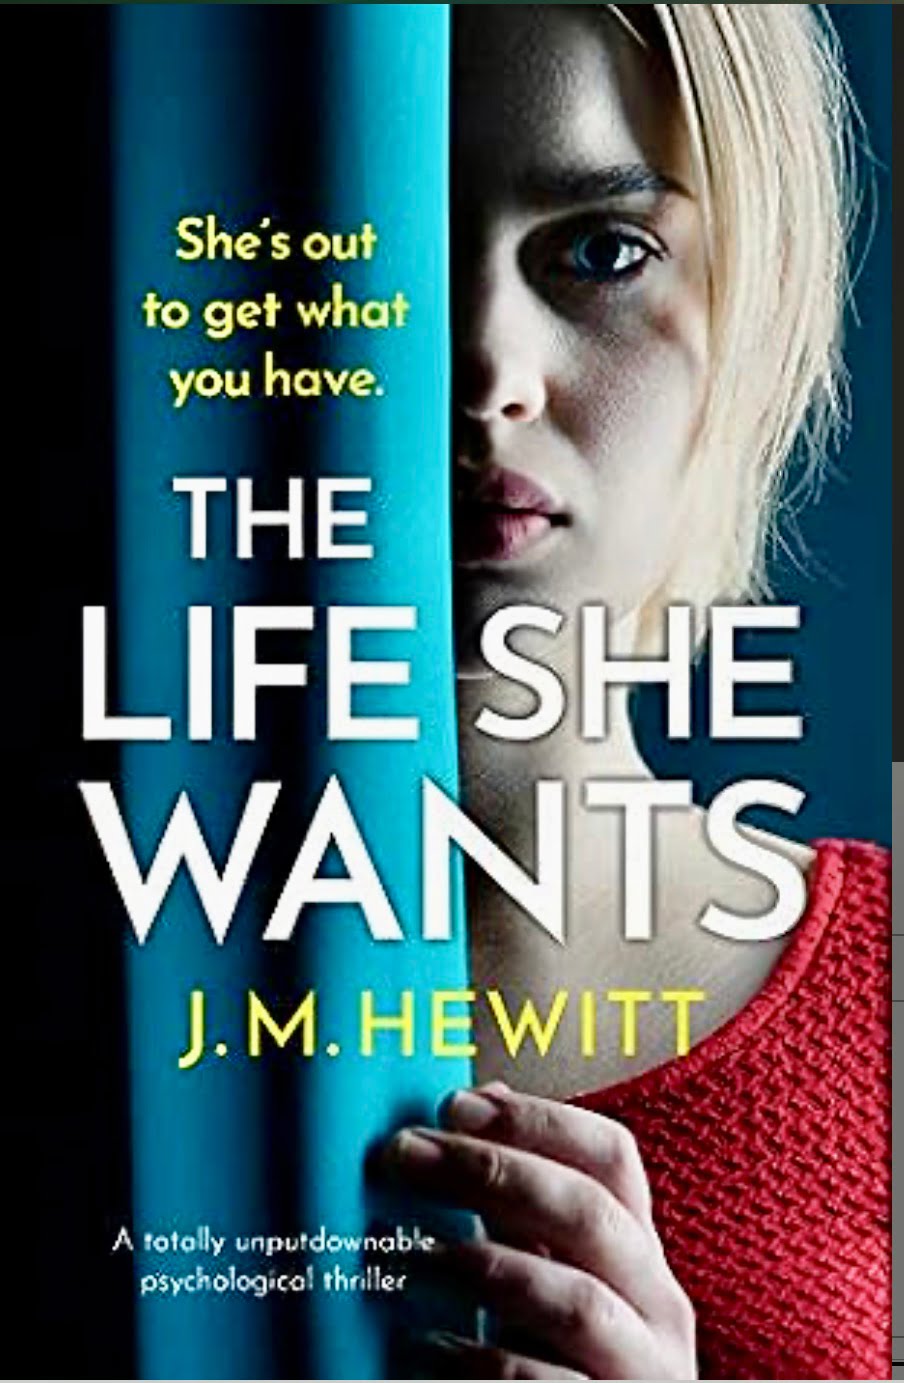 THE LIFE SHE WANTS BY J.M.HEWITT – BOOK REVIEW